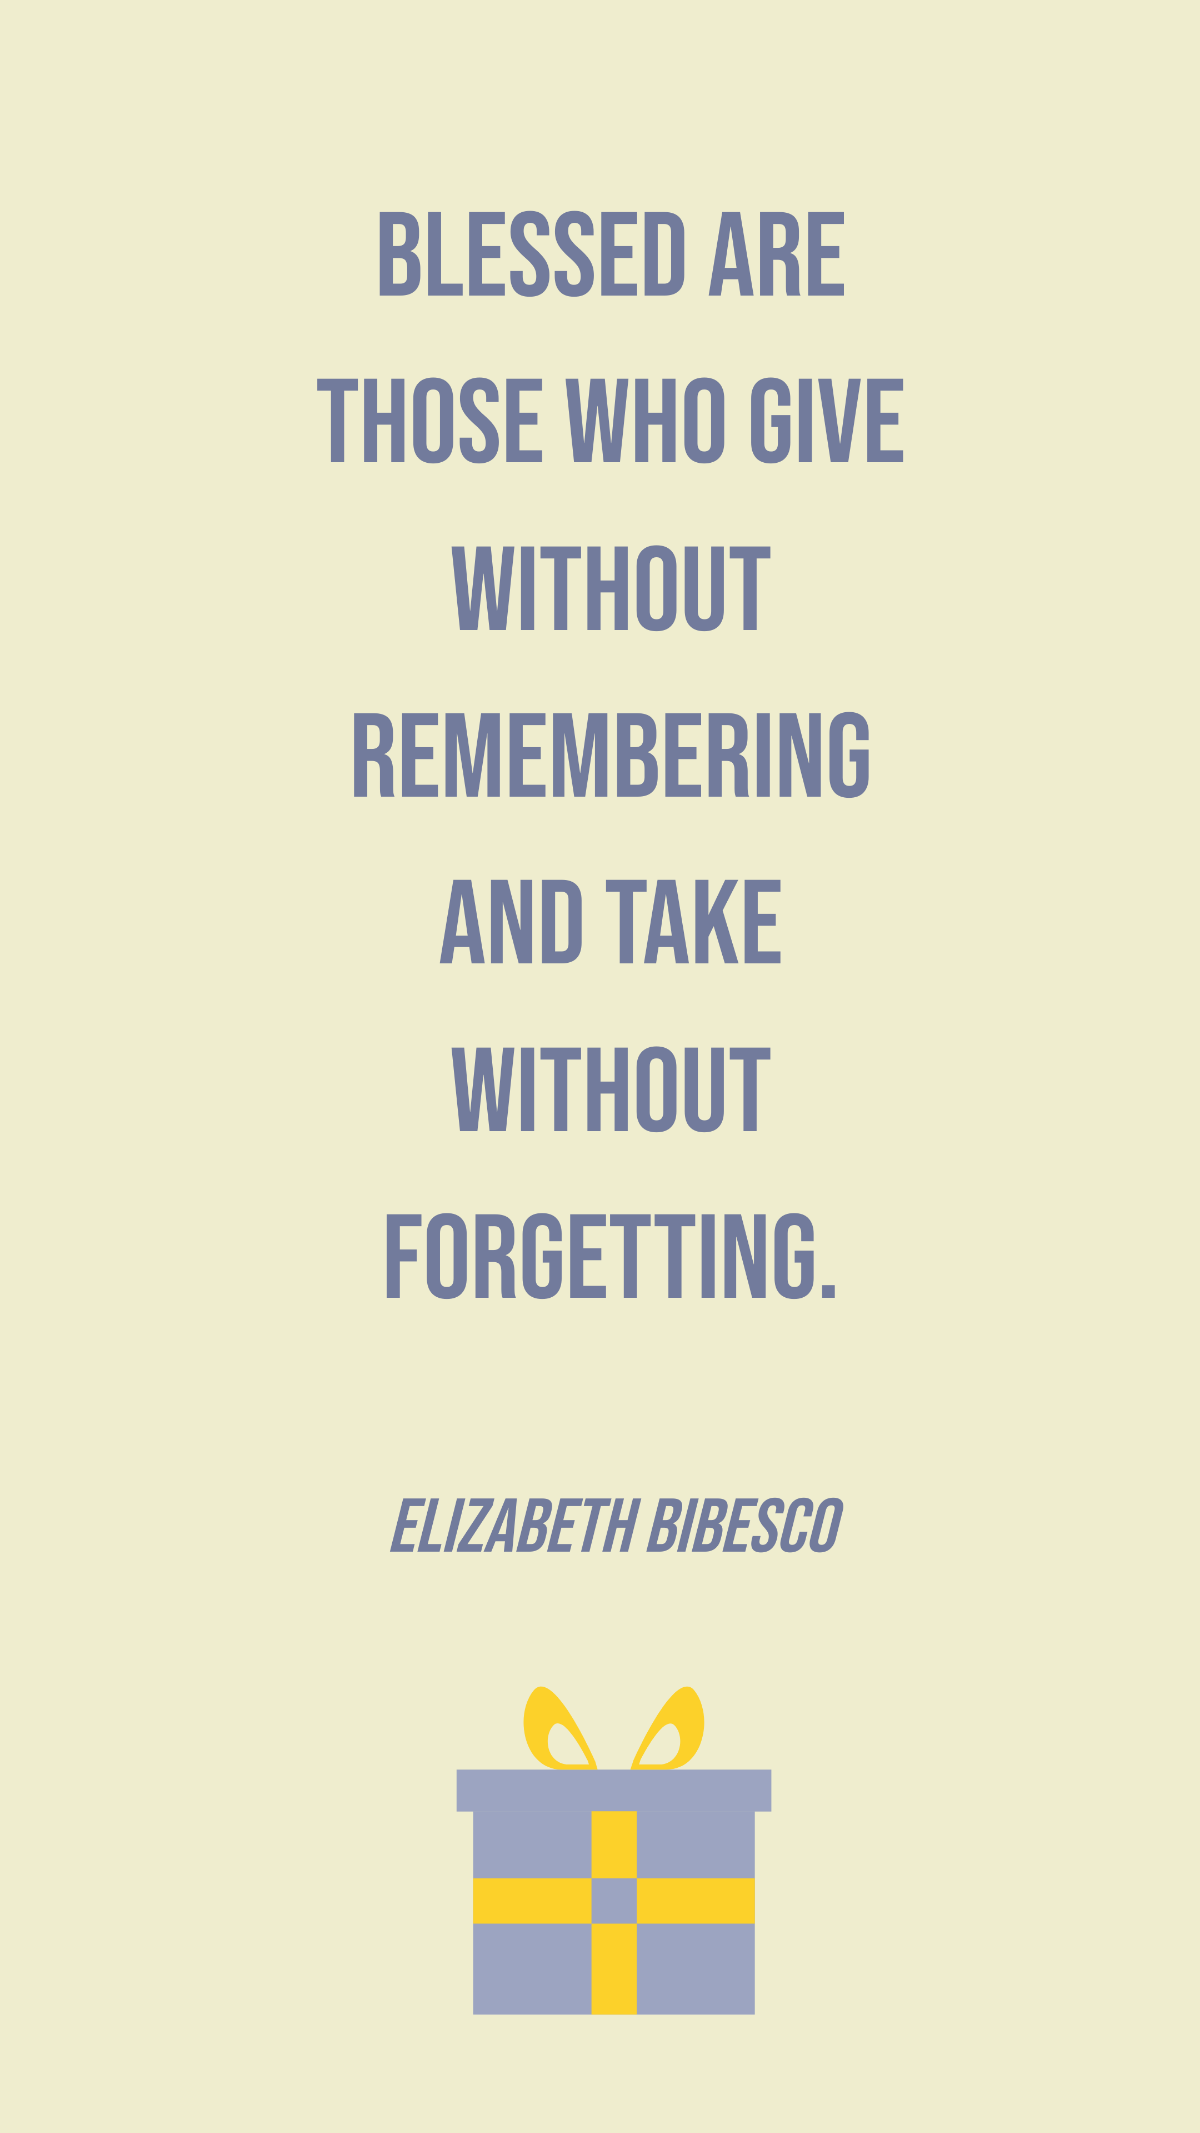 Elizabeth Bibesco - Blessed are those who give without remembering and take without forgetting.